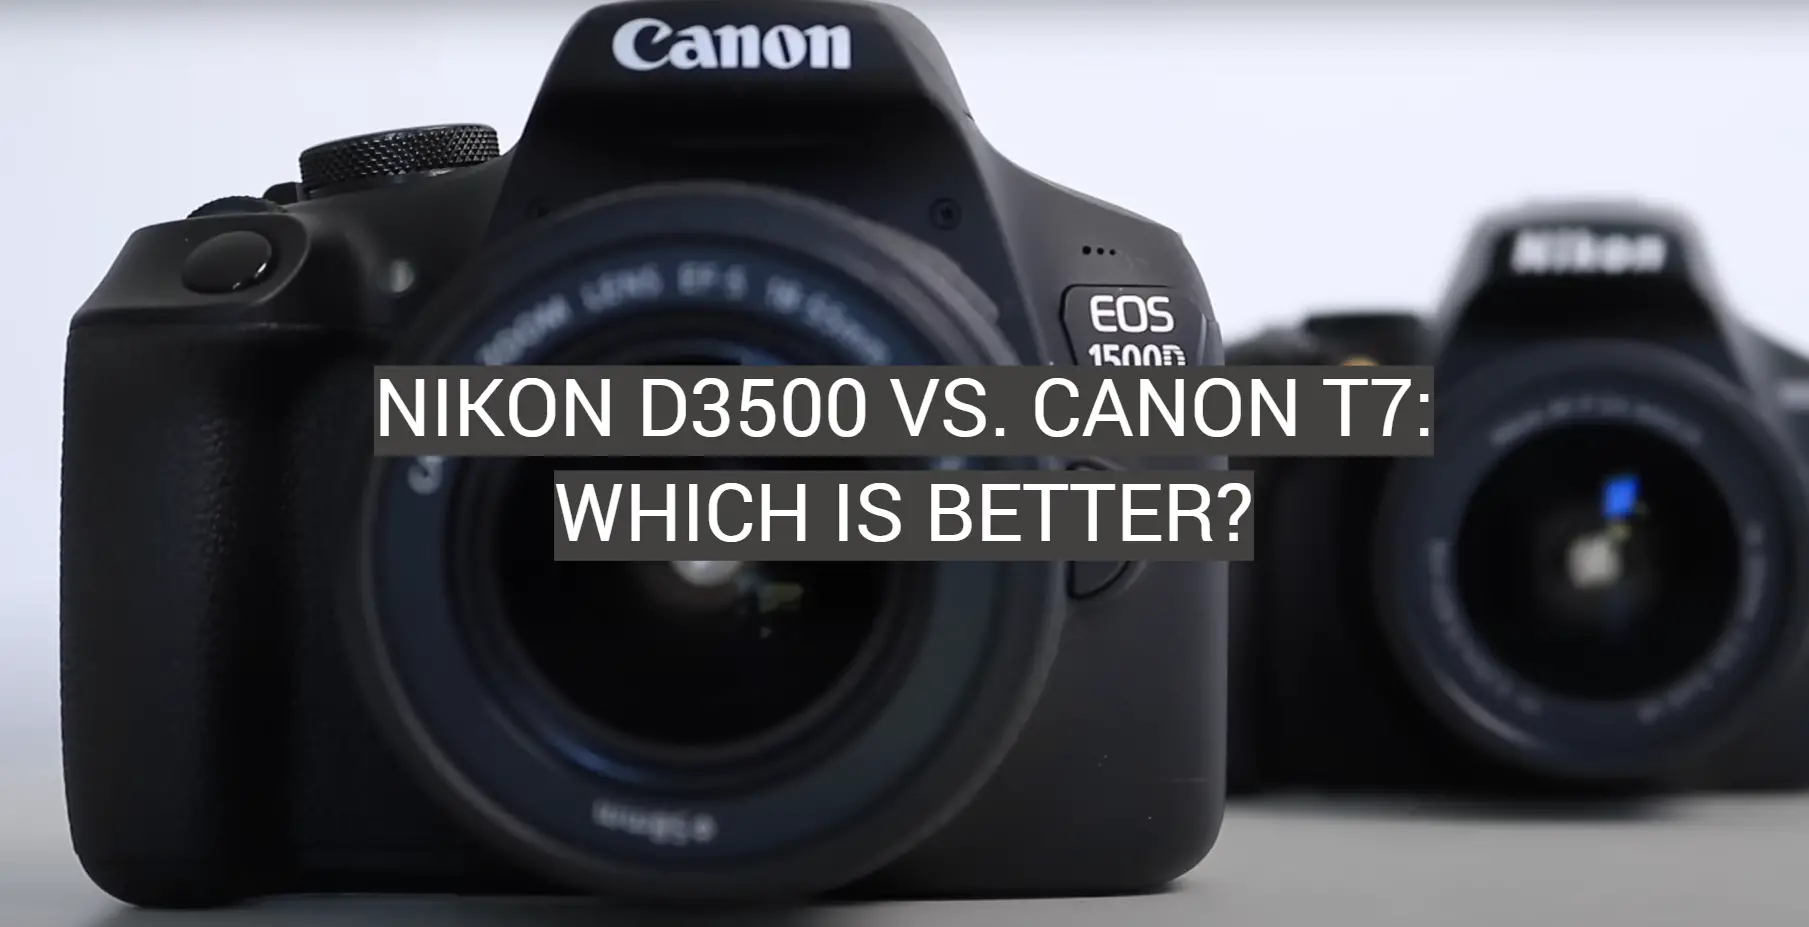 Nikon D3500 vs. Canon T7: Which is Better?